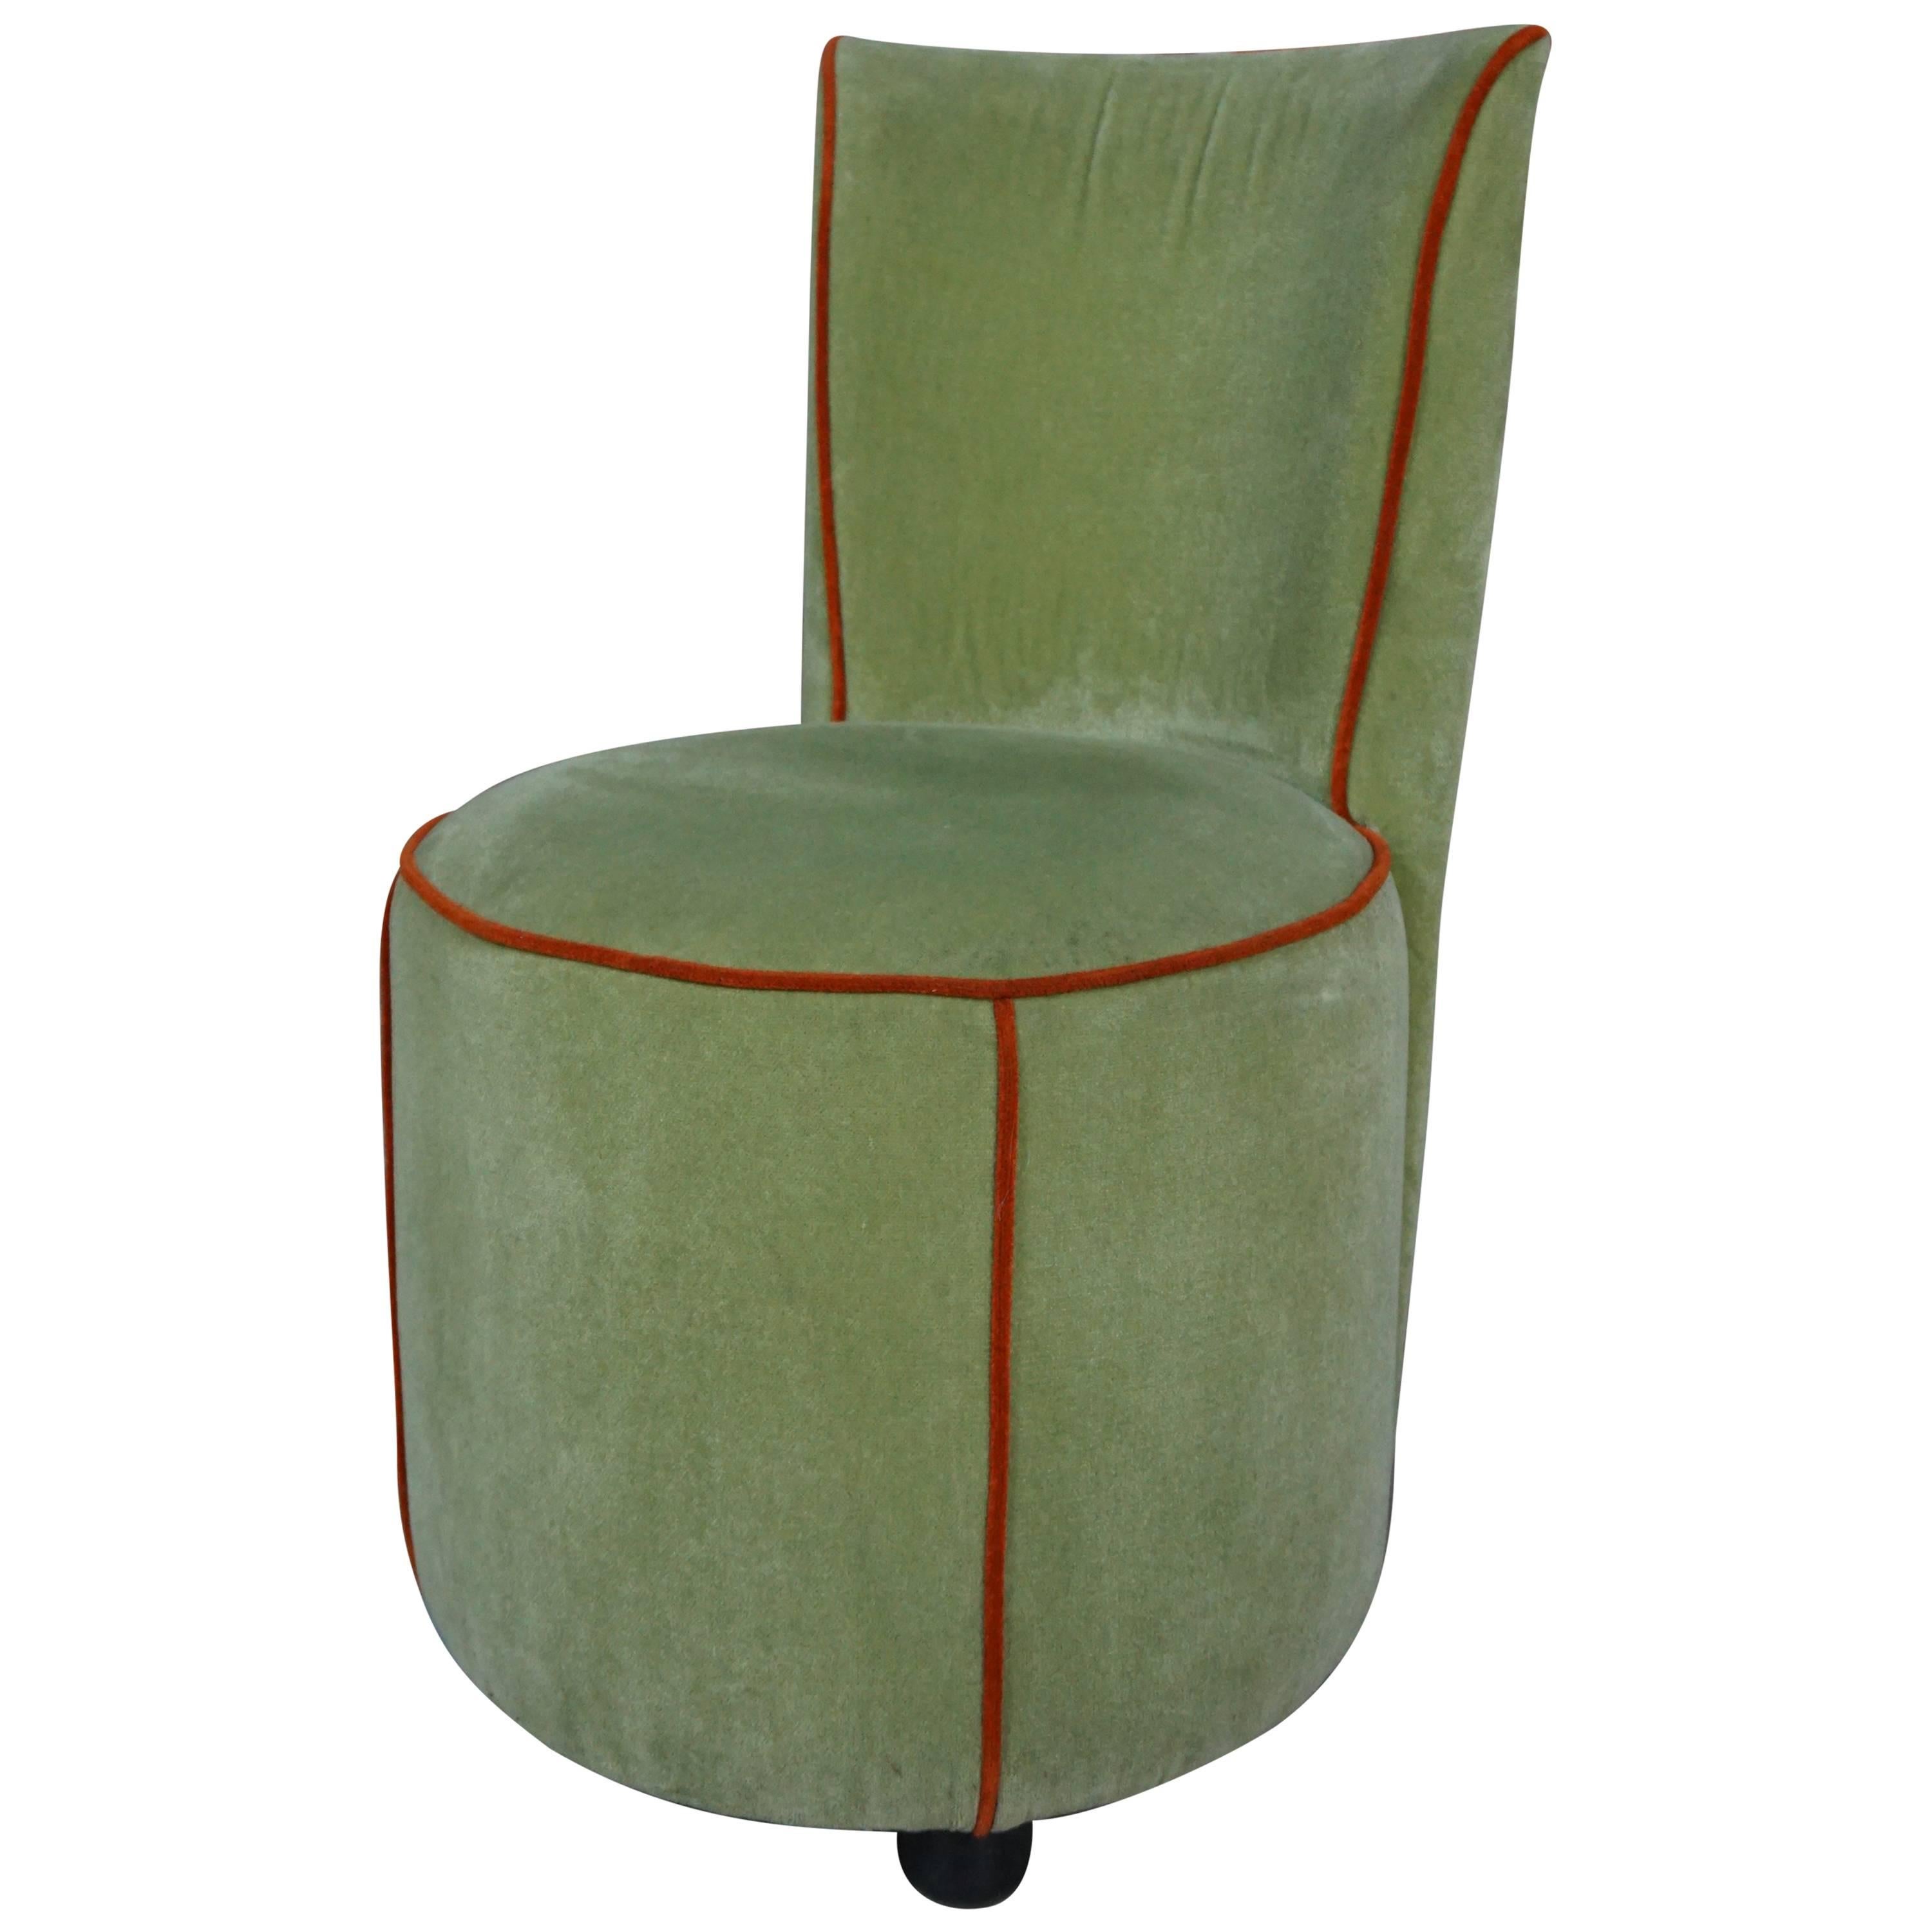 Design Toad Lounge Chair / Cocktail Chair